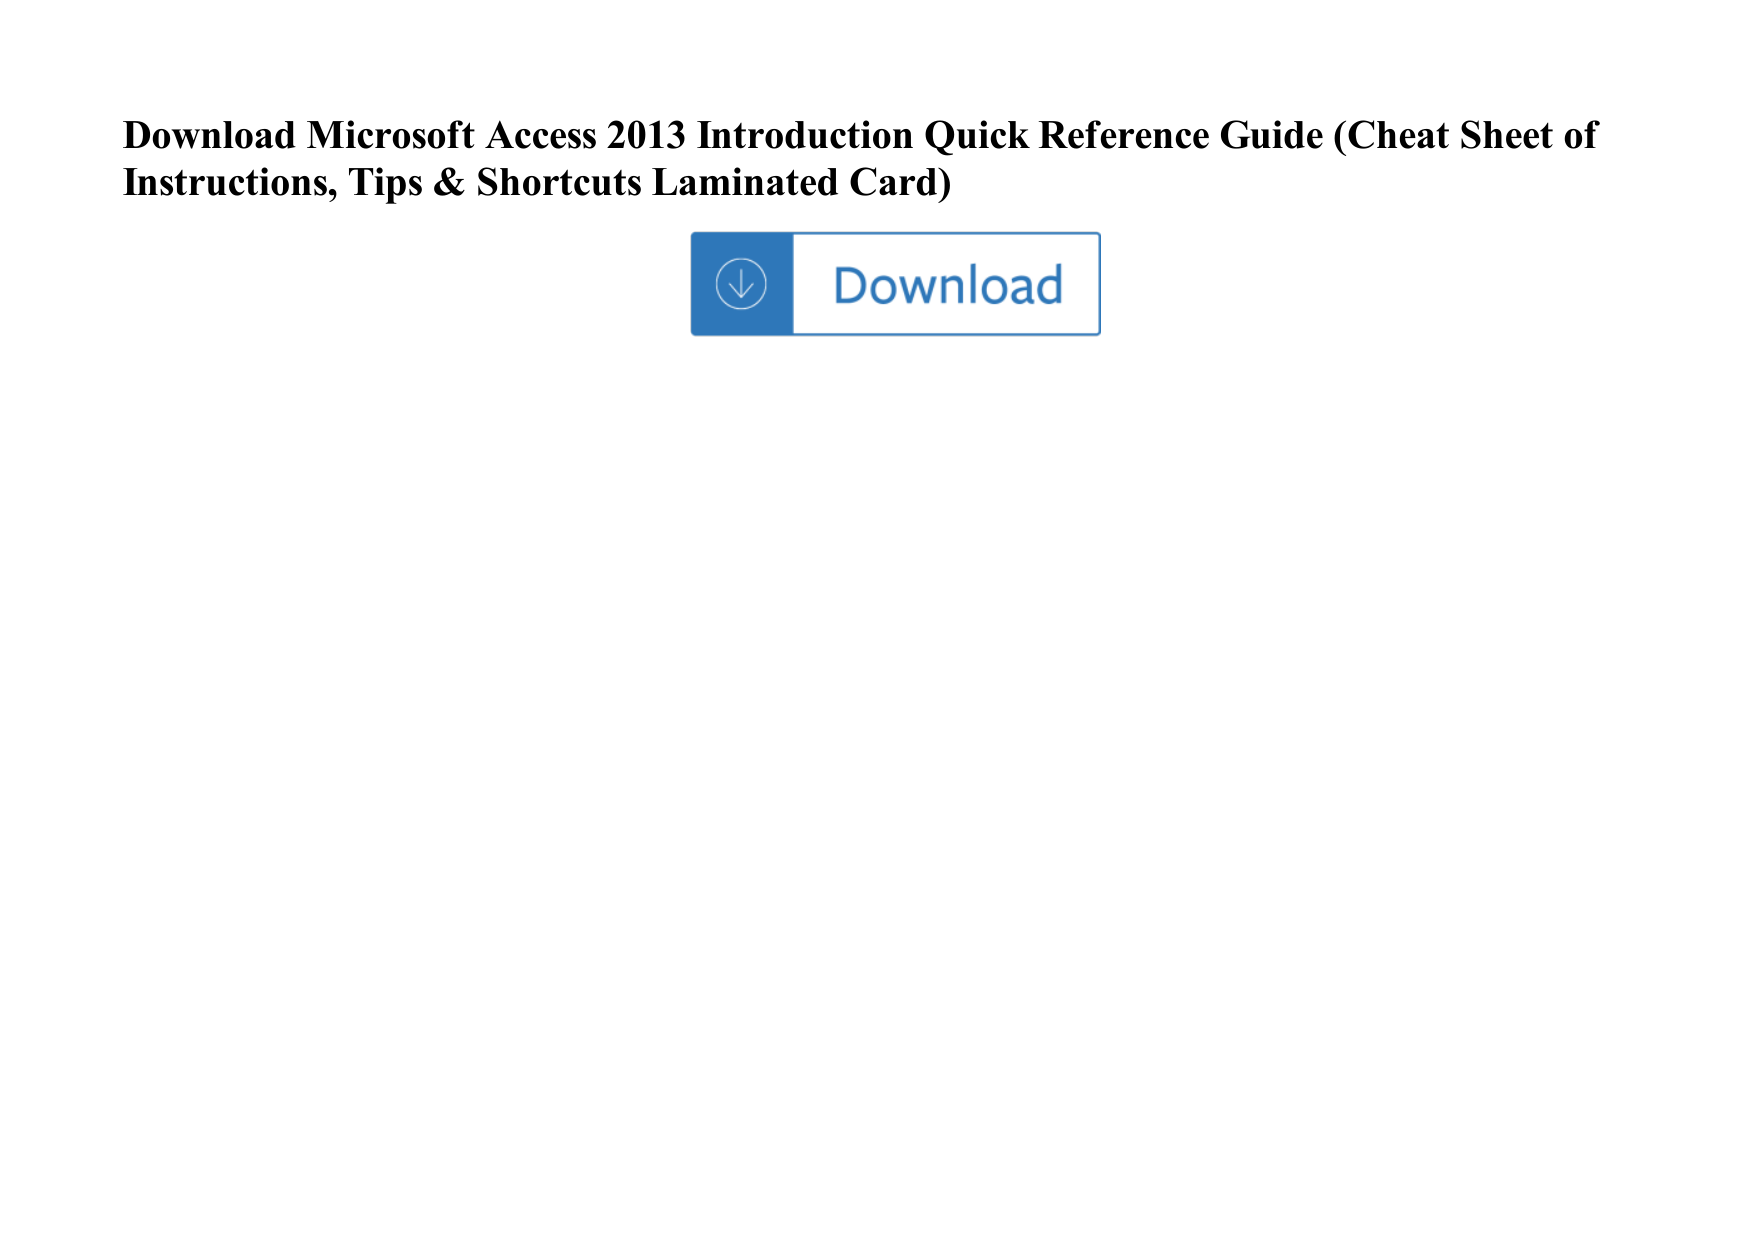 Page 1 of 1 - Microsoft Access 2013 Introduction Quick Reference Guide (Cheat Sheet Of Instructions, Tips & Shortcuts  Laminated Card) Microsoft-access-2013-introduction-quick-reference-guide-cheat-sheet-of-instructions-tips-shortcuts-laminated-card